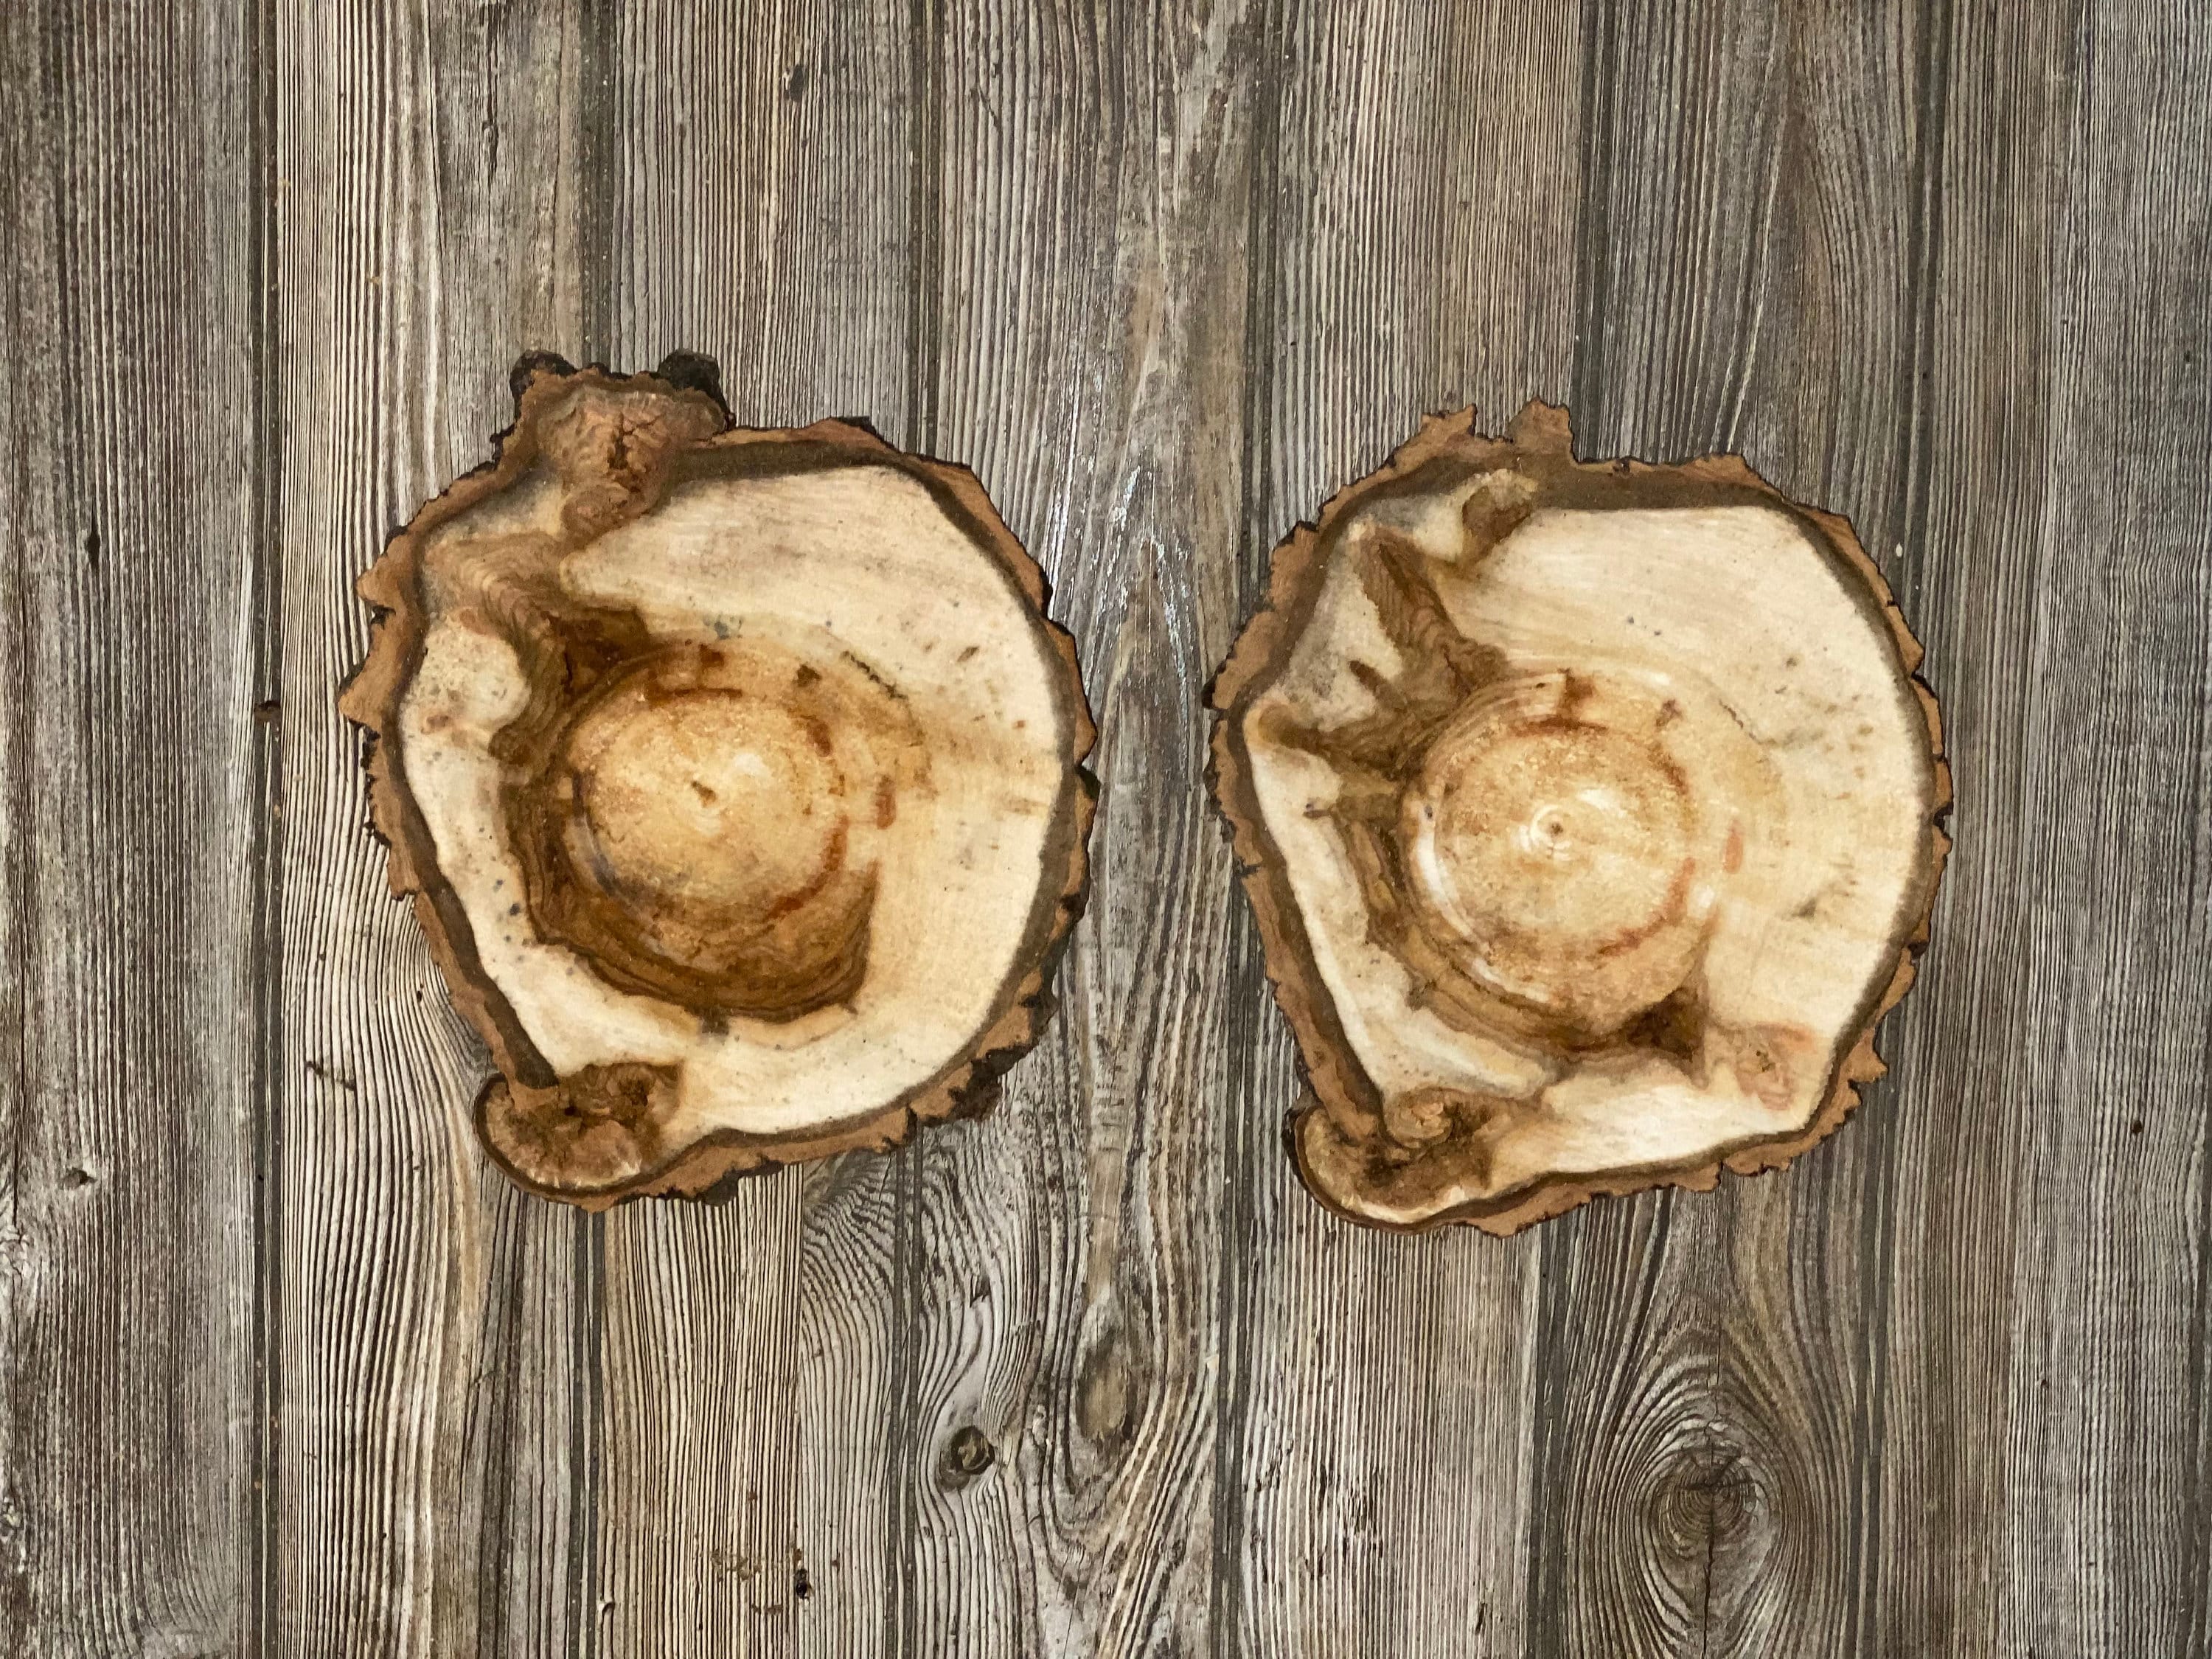 Two Aspen Burl Slices, Approximately 10 Inches Long by 9 Inches Wide and 3/4 Inches Thick